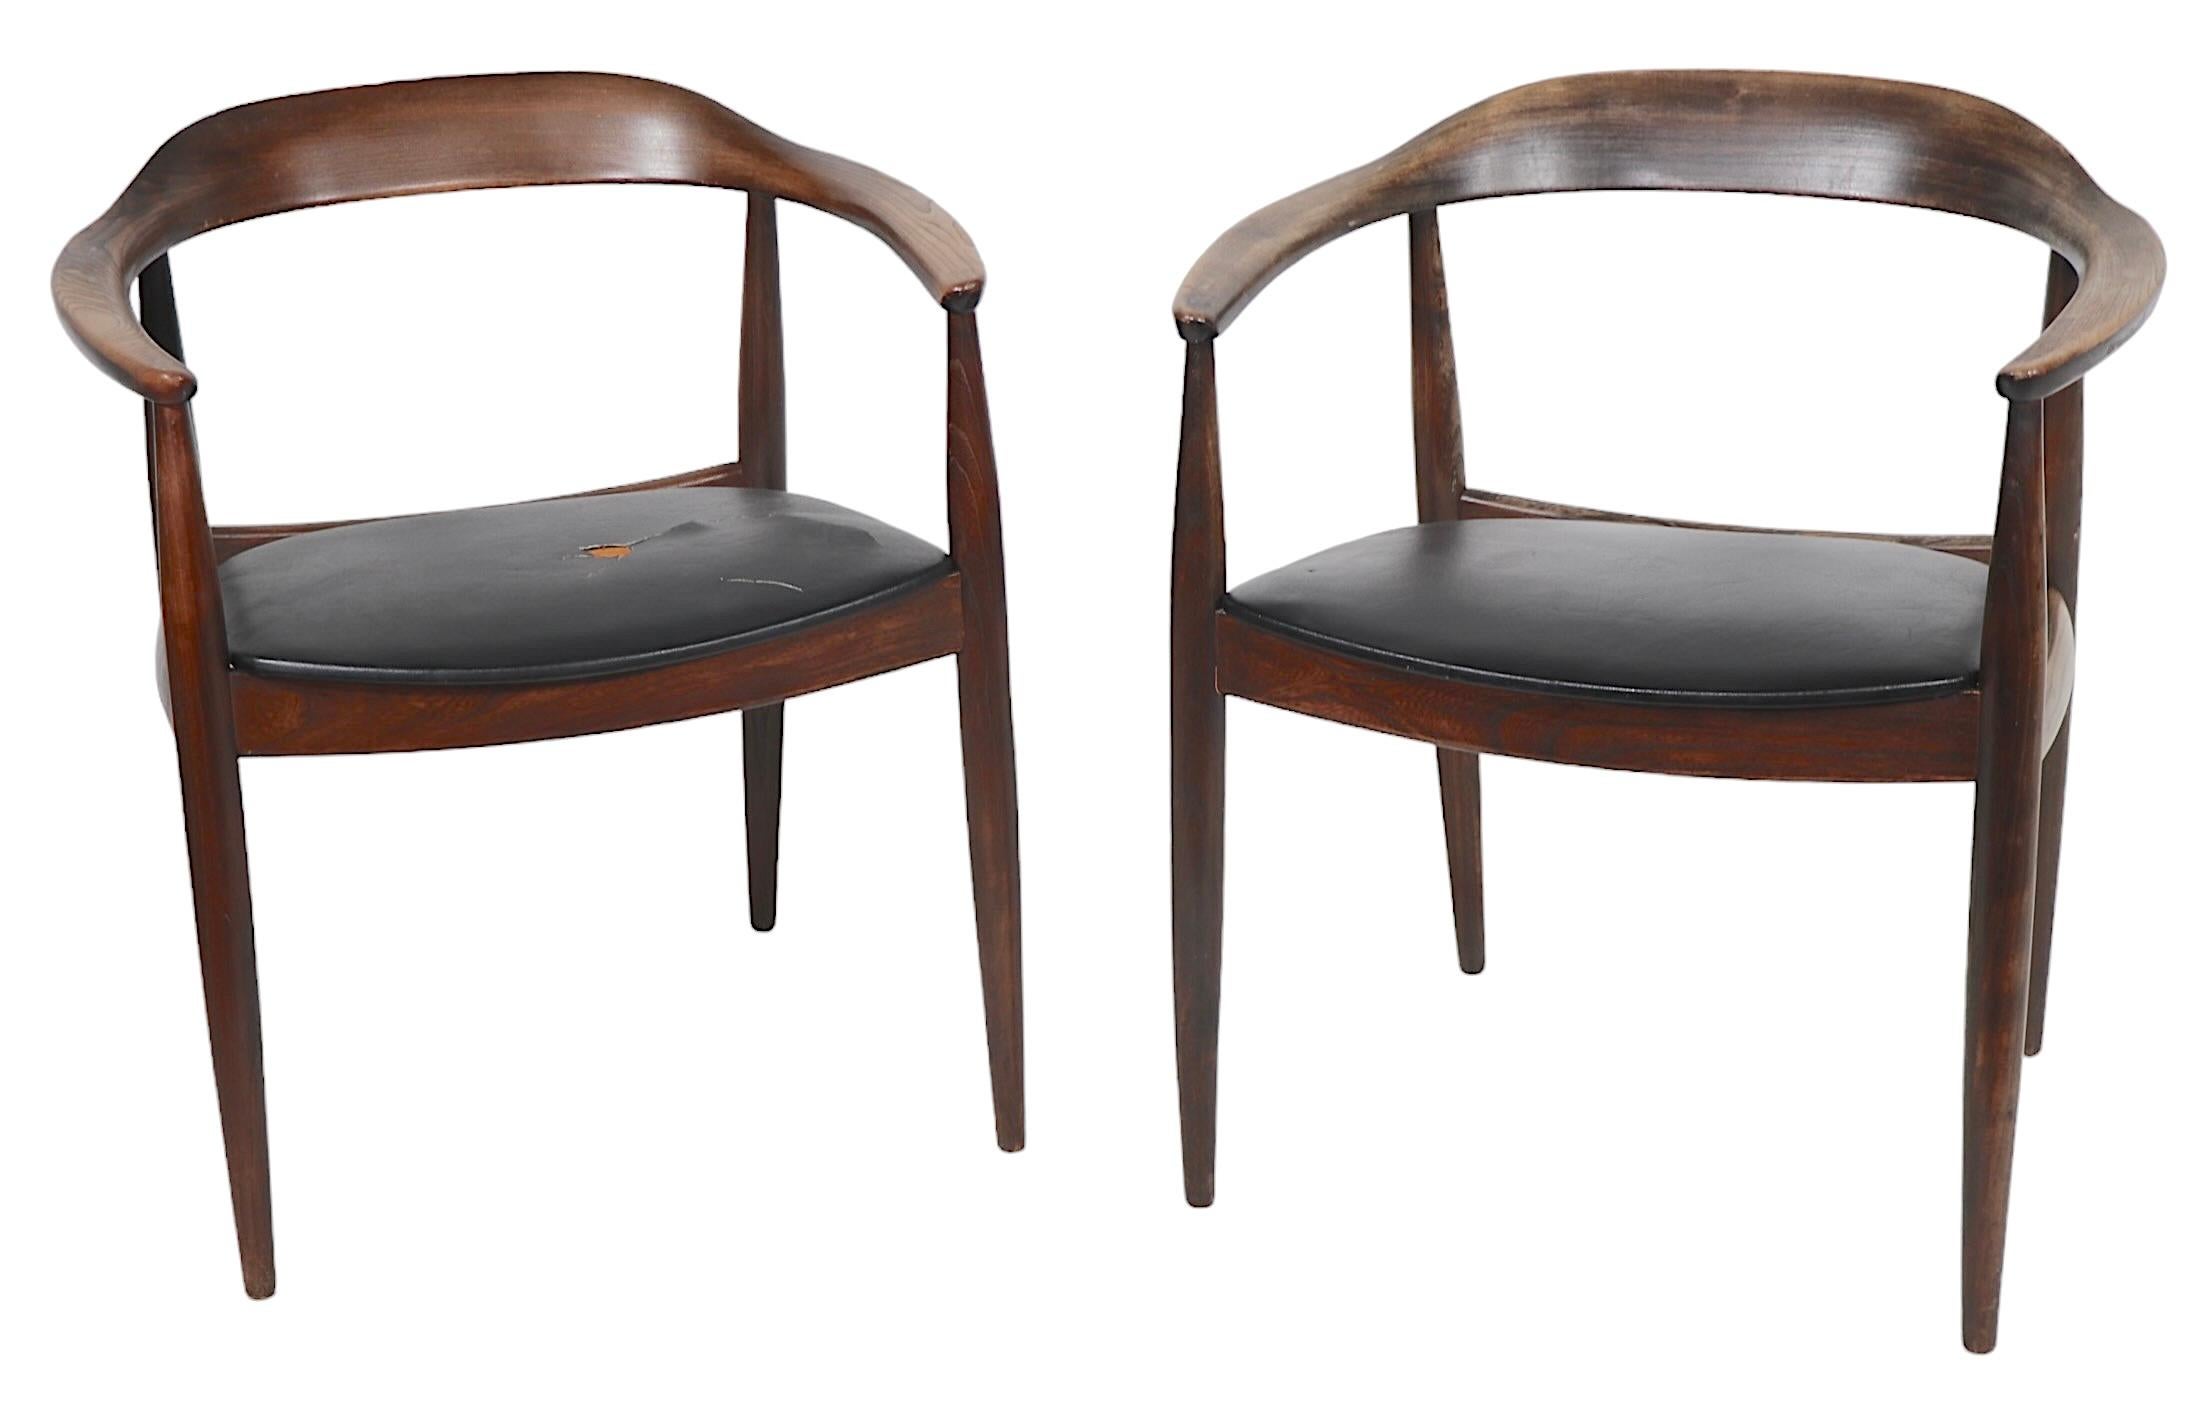 Pair of Danish Mid Century Modern arm, or dining chairs designed by Illum Wikkelso, cabinetry by Niels Eilersen, made in Denmark circa 1950's. These classic chairs are constructed of solid wood, I believe they are teak, with vinyl seats.
 The chairs